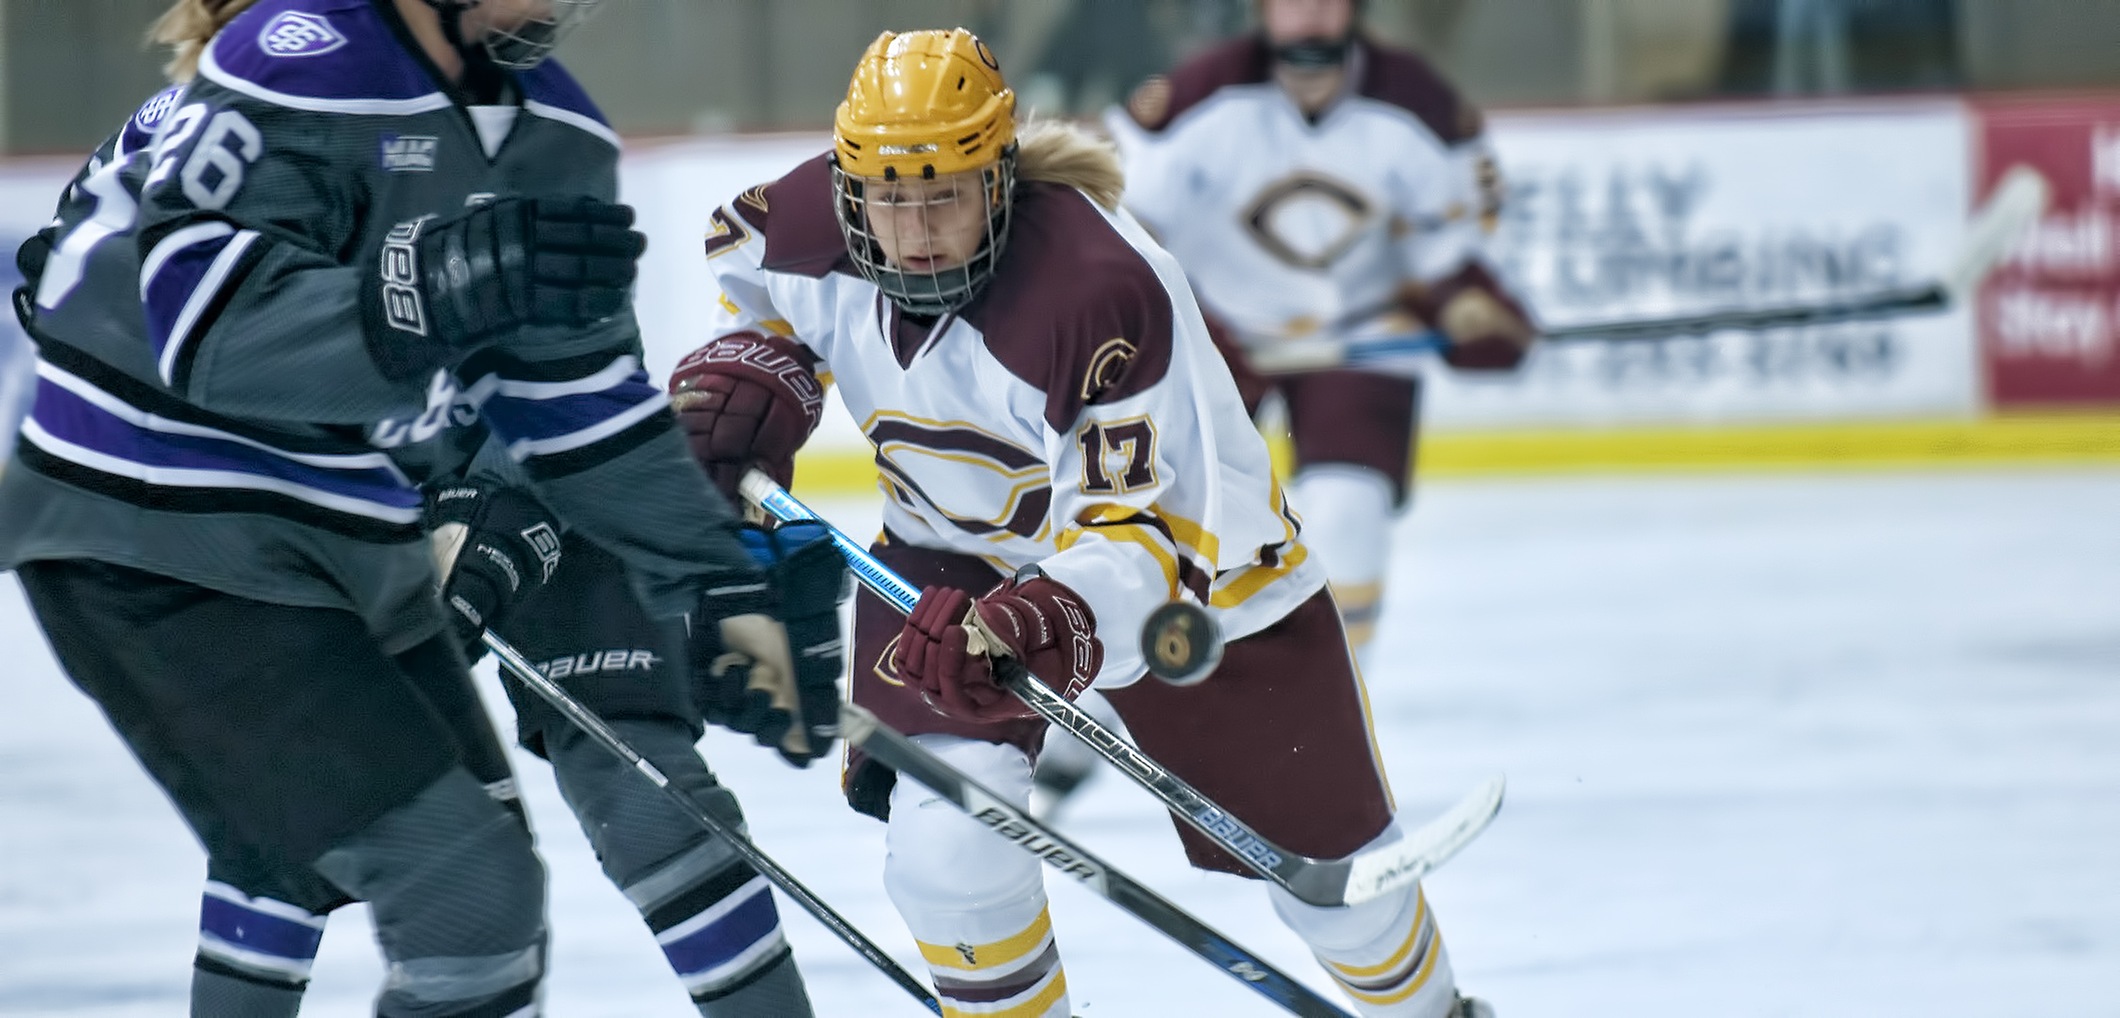 Senior Meghan Rethemeier scored the lone goal for the Cobbers' in their series opener at No.10-ranked St. Thomas.